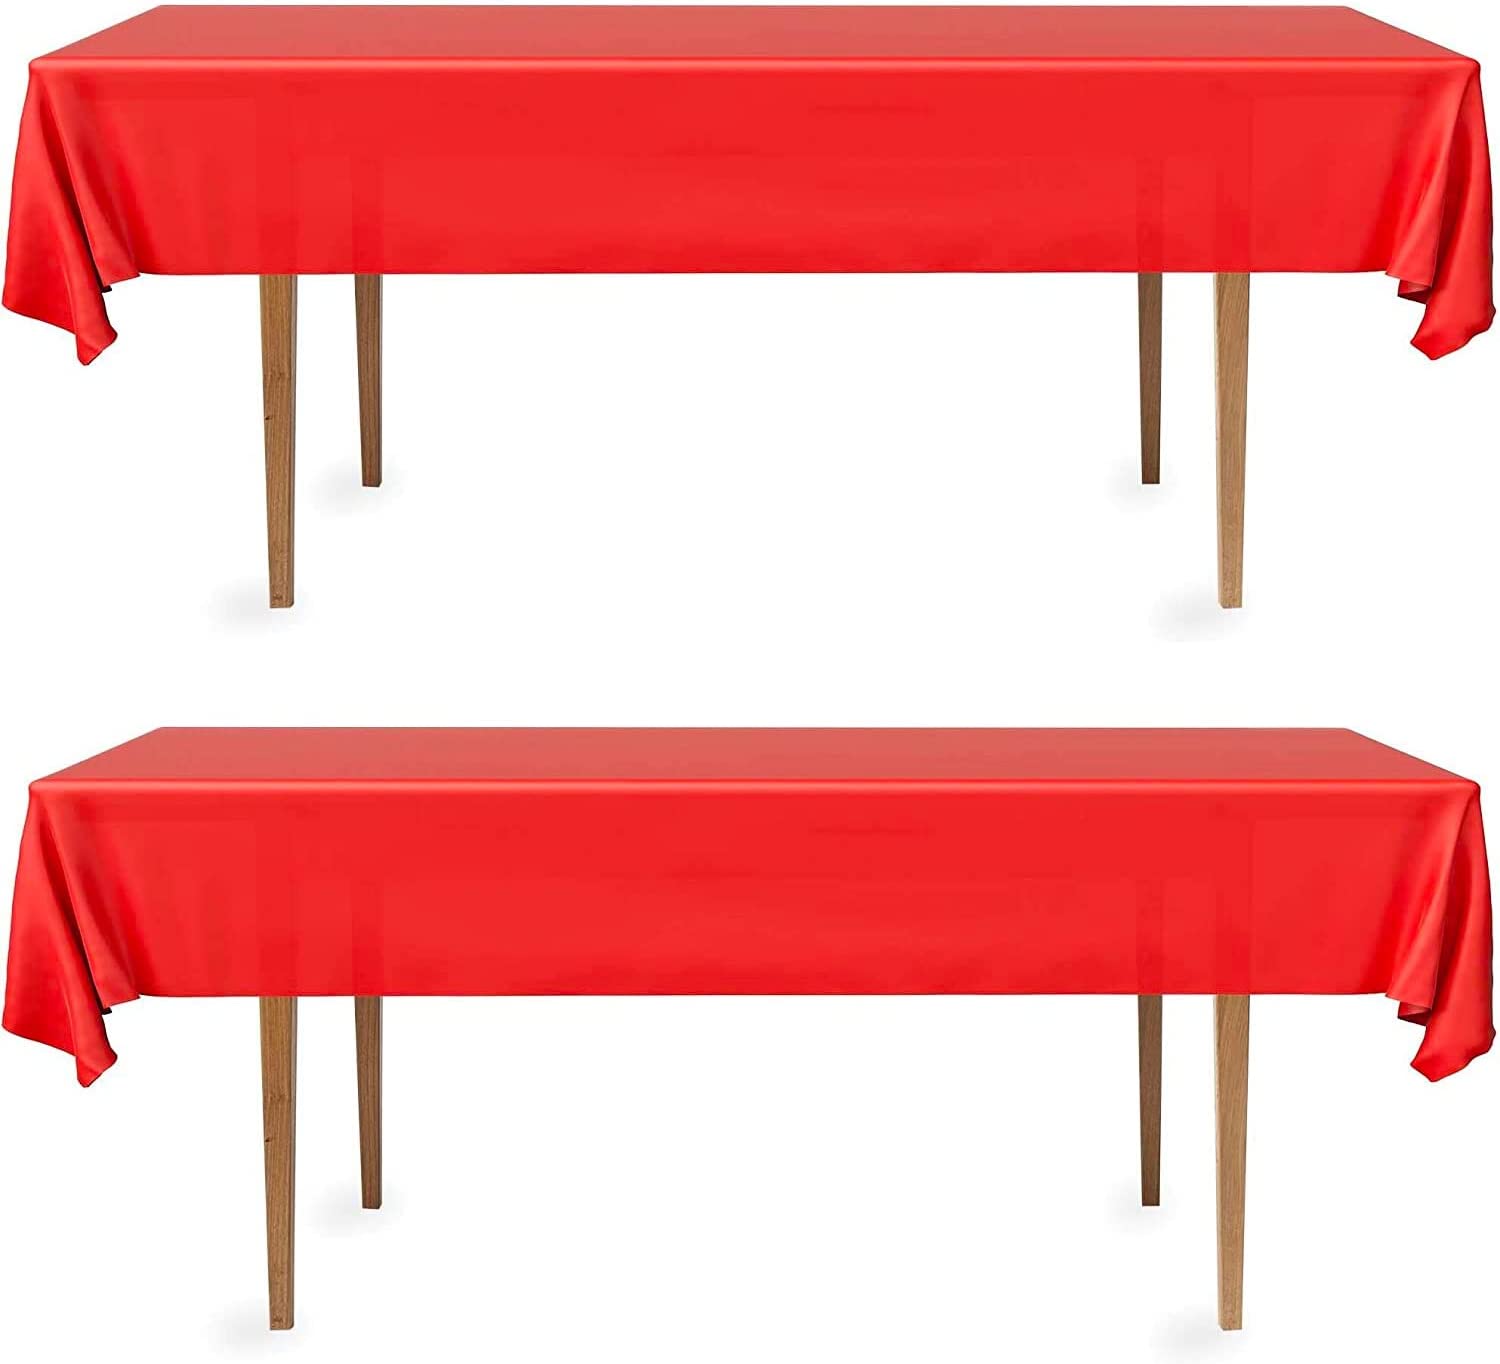 DecorRack Long Party Disposable Table Covers, 2-Pack